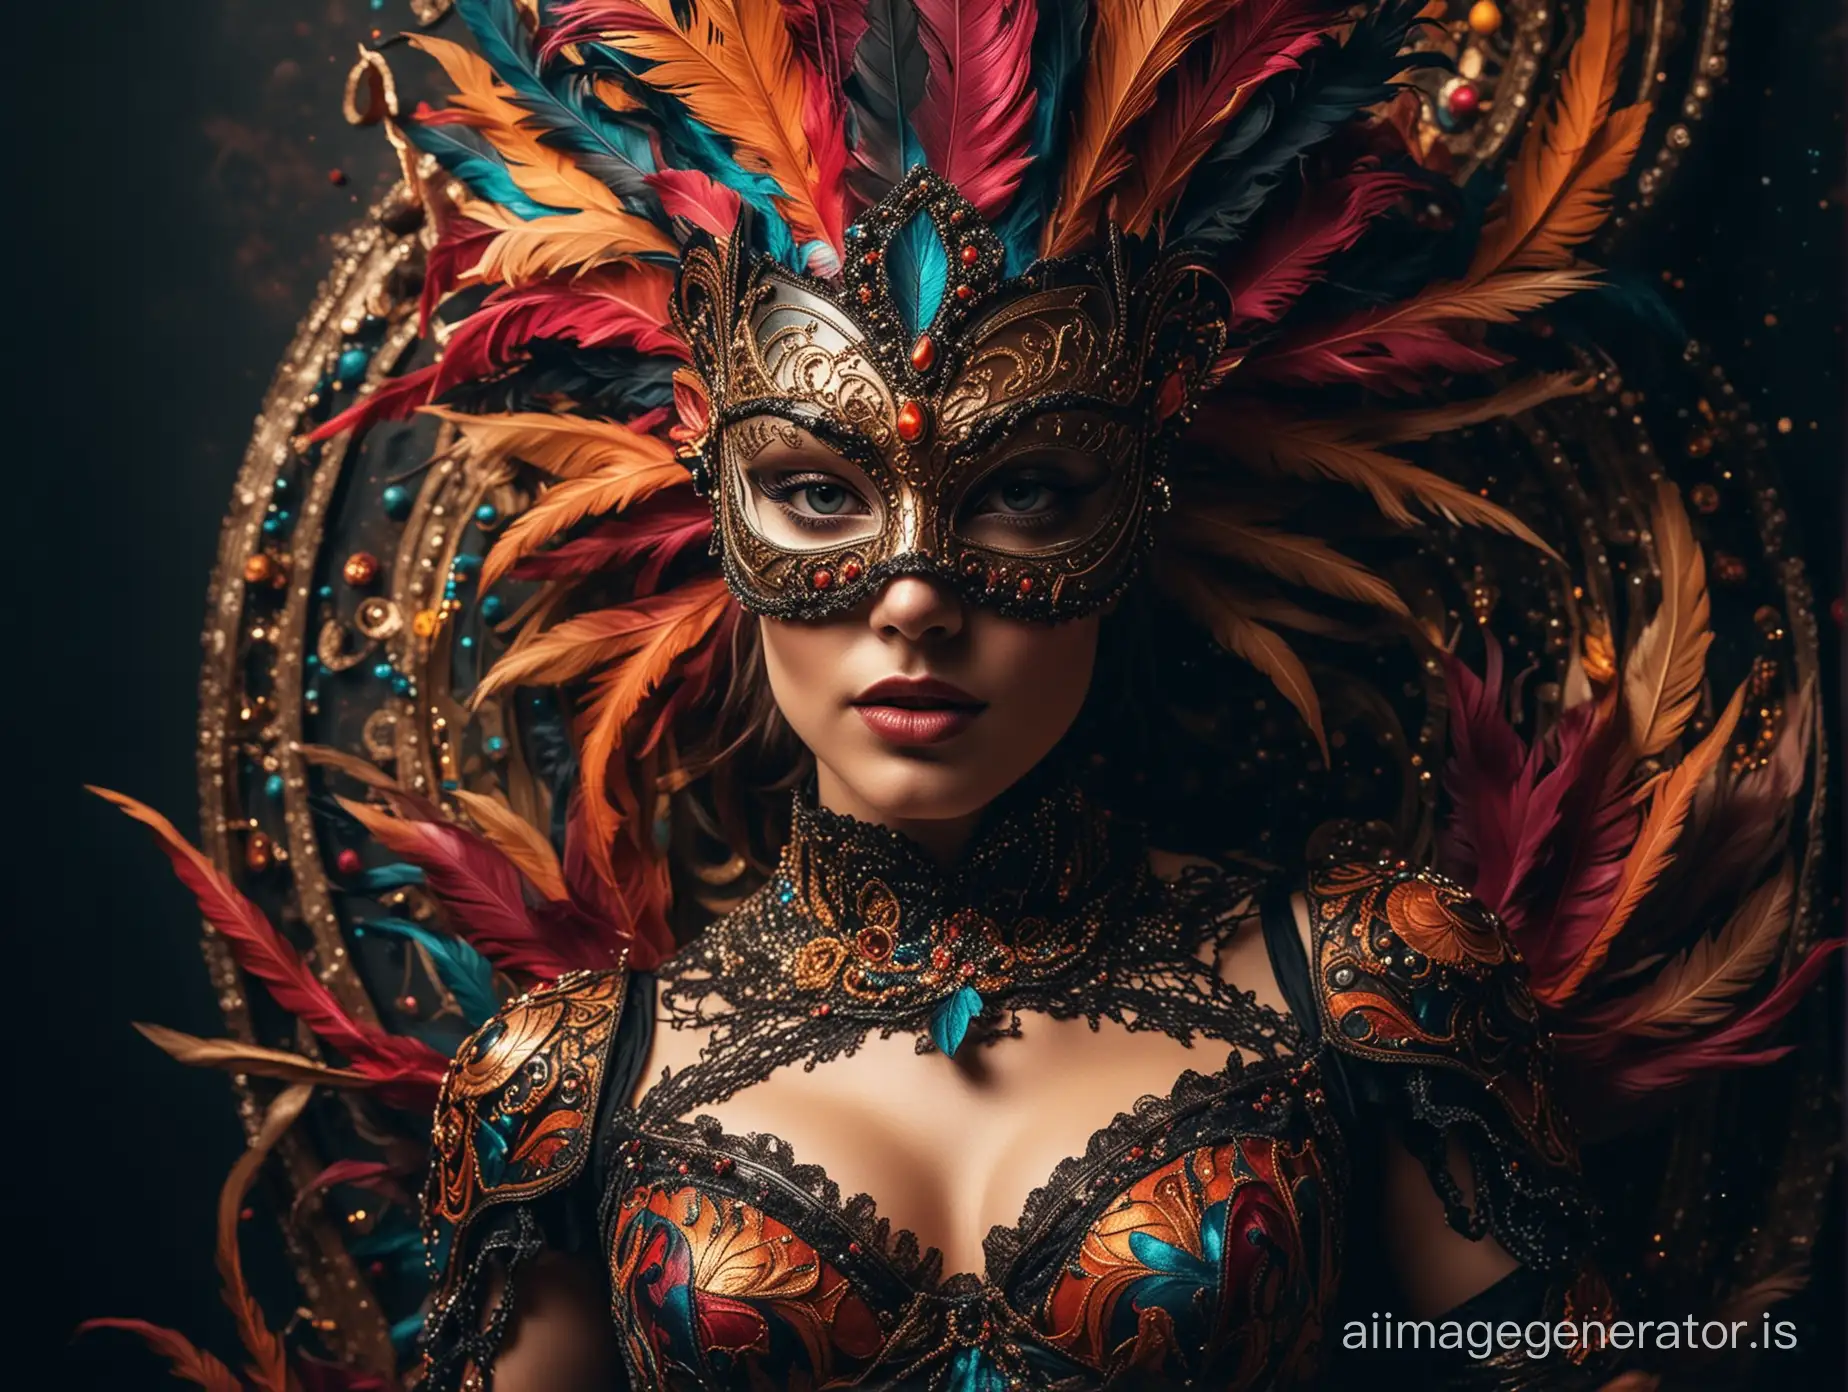 Luxurious-Masquerade-Costume-Woman-with-Intricate-Jet-Design